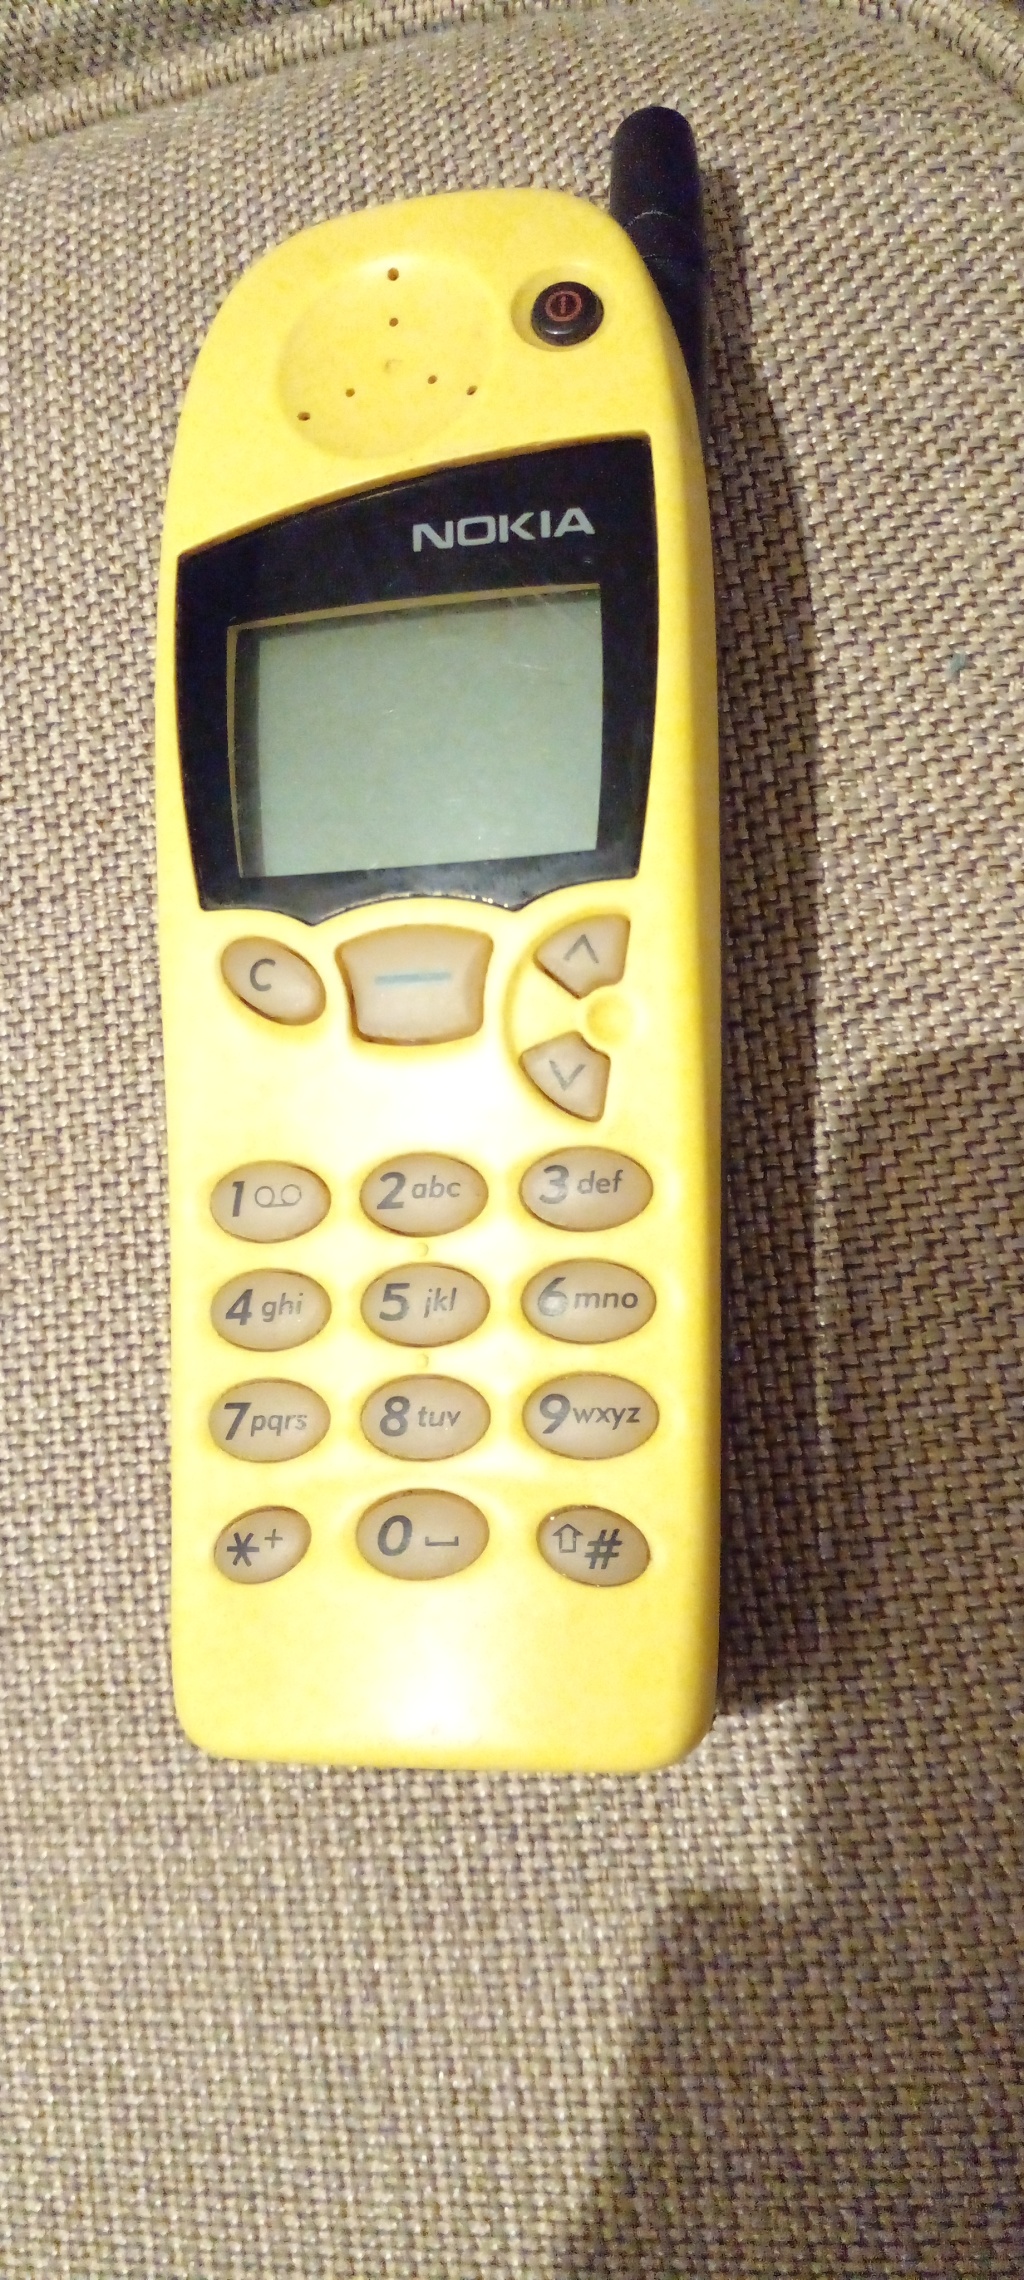 Nokia - NOKIA (yellow) 5110 untested cell phone.Discontinued 2000 was ...